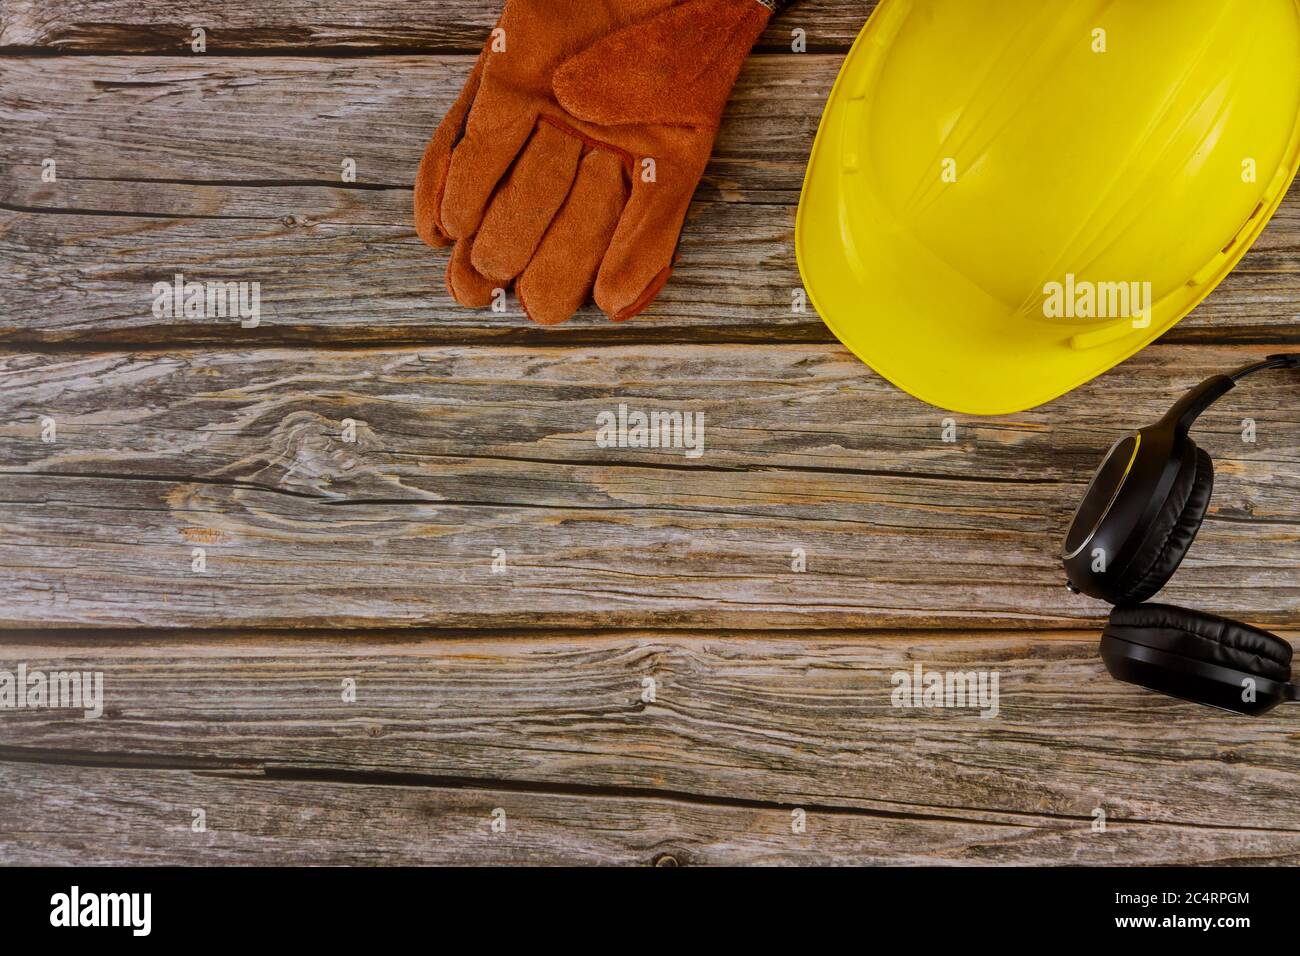 Protective workwear safety standard construction safety earmuffs leather safety helmet protective gloves on wooden table top view Stock Photo